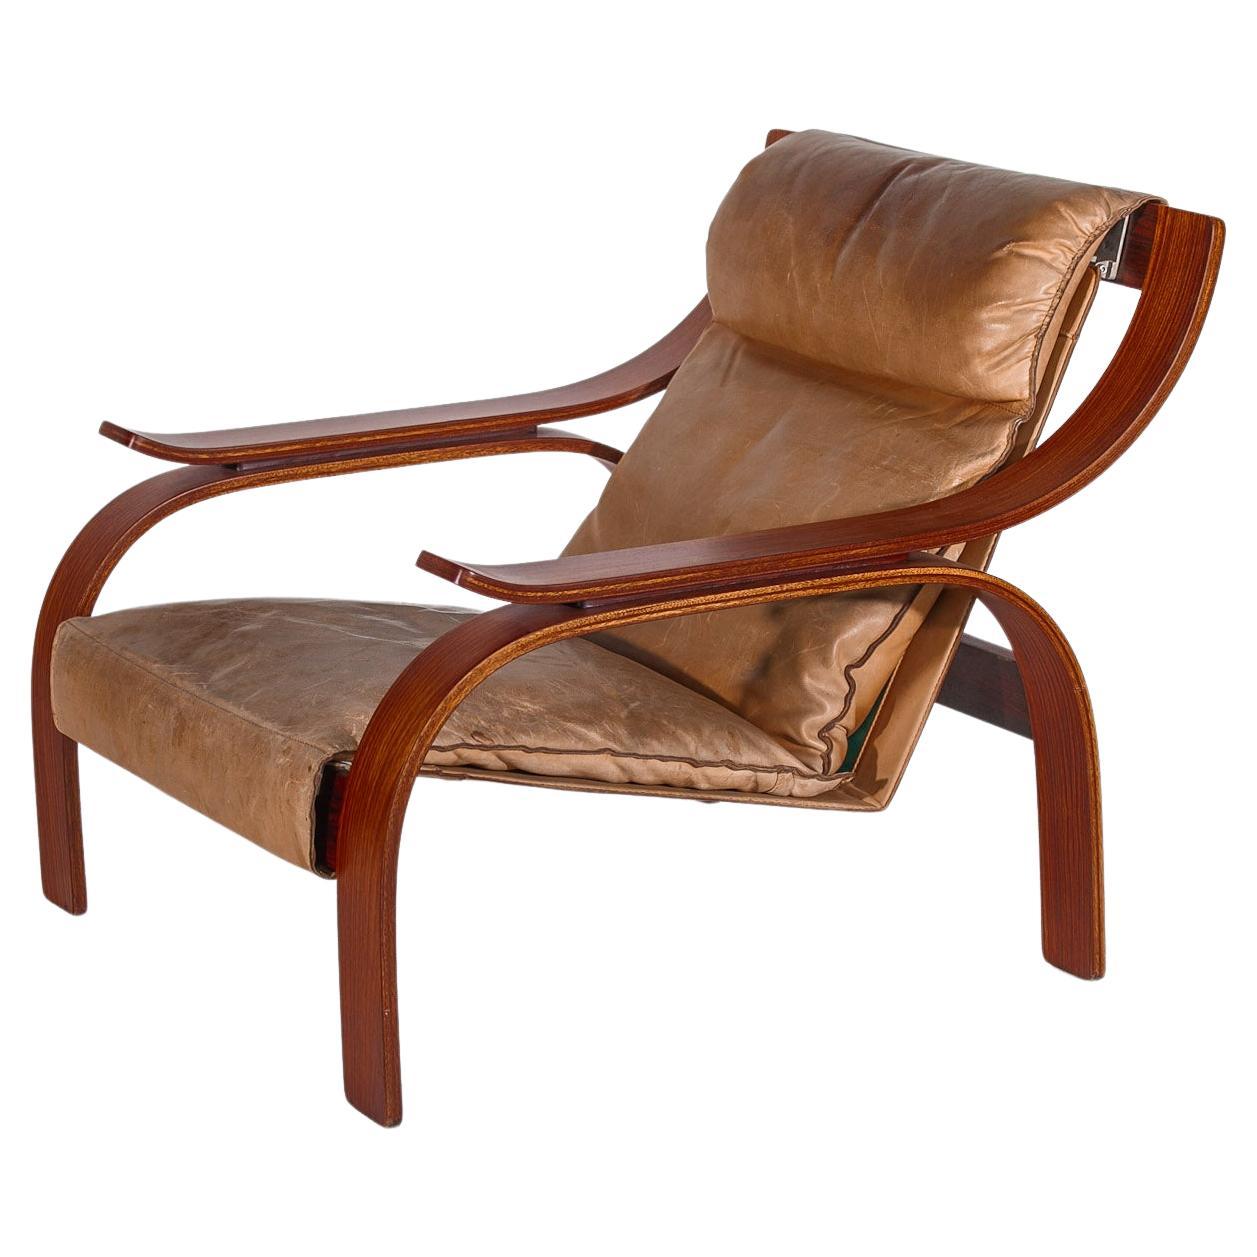 Set of Two Lounge Chairs designed by Marco Zanuso, 1962 Italy, Model "Woodline" For Sale